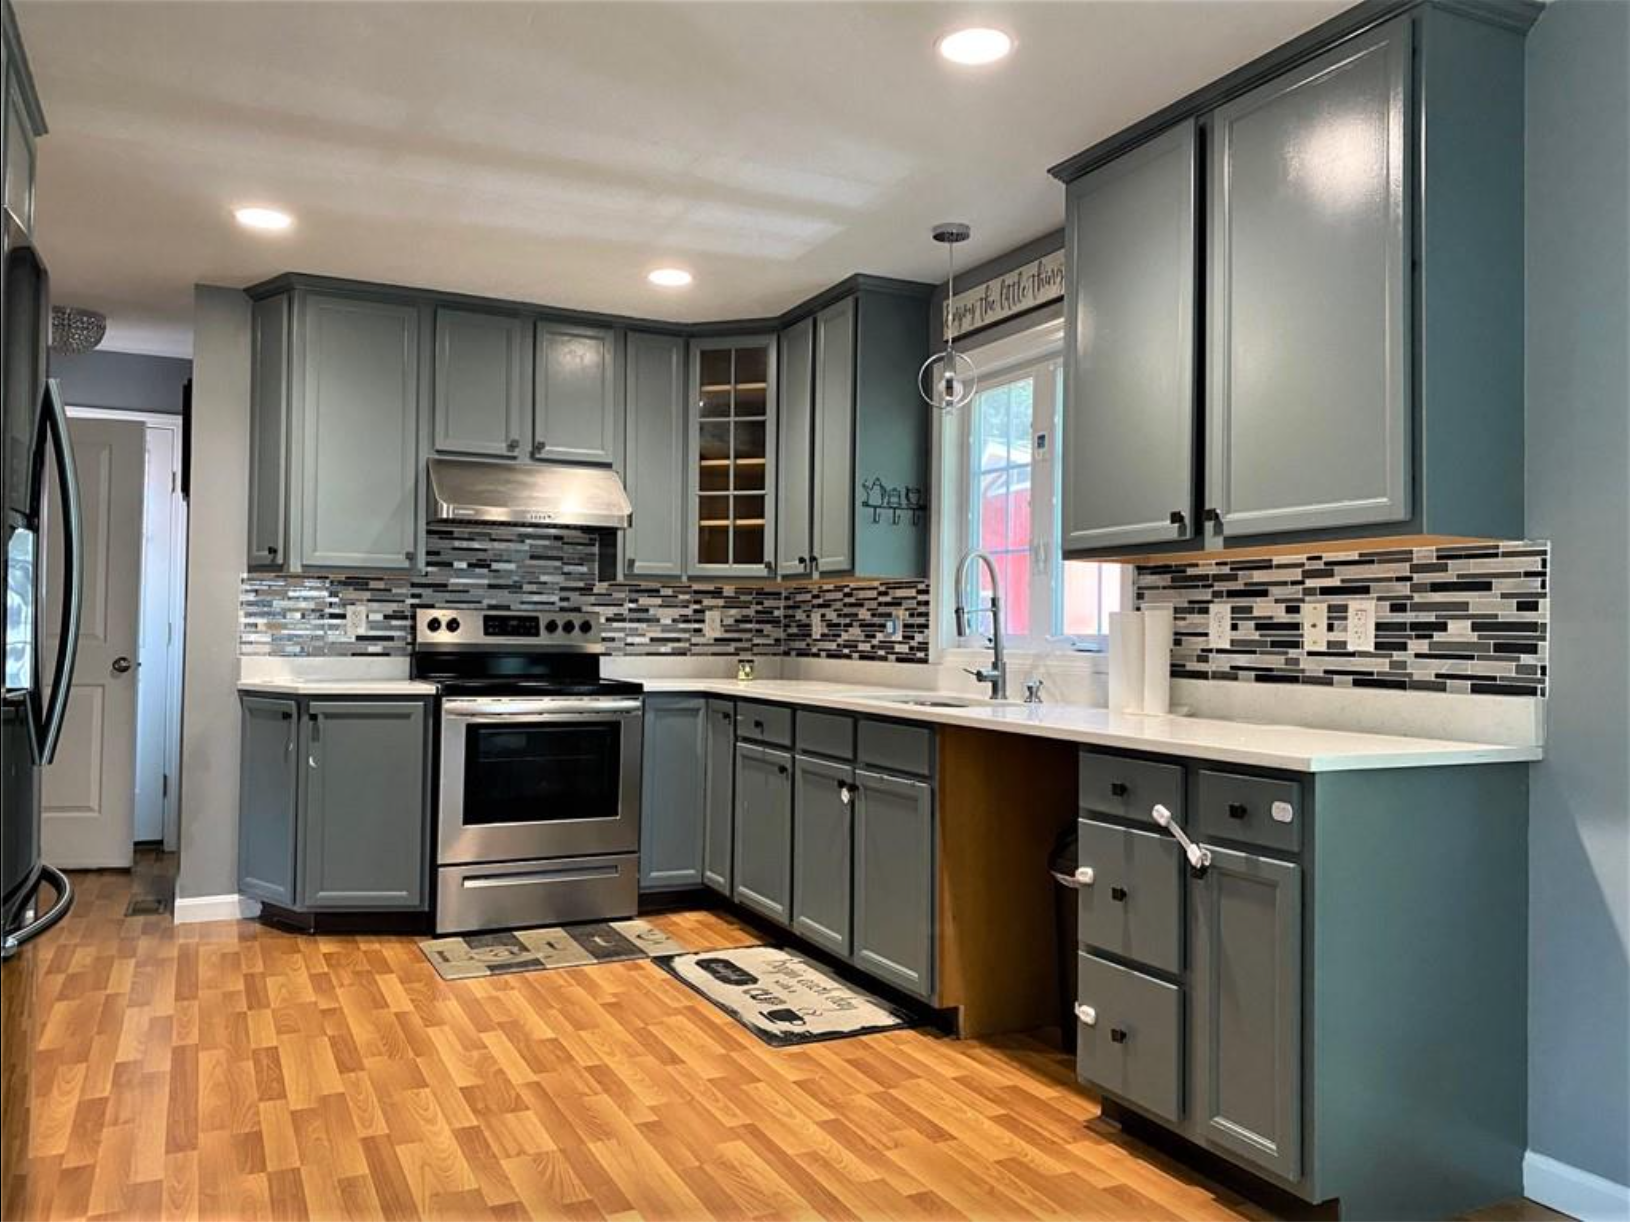 The kitchen has hardwood floors and stainless steel appliances with teal cabinets and a window above the sink.